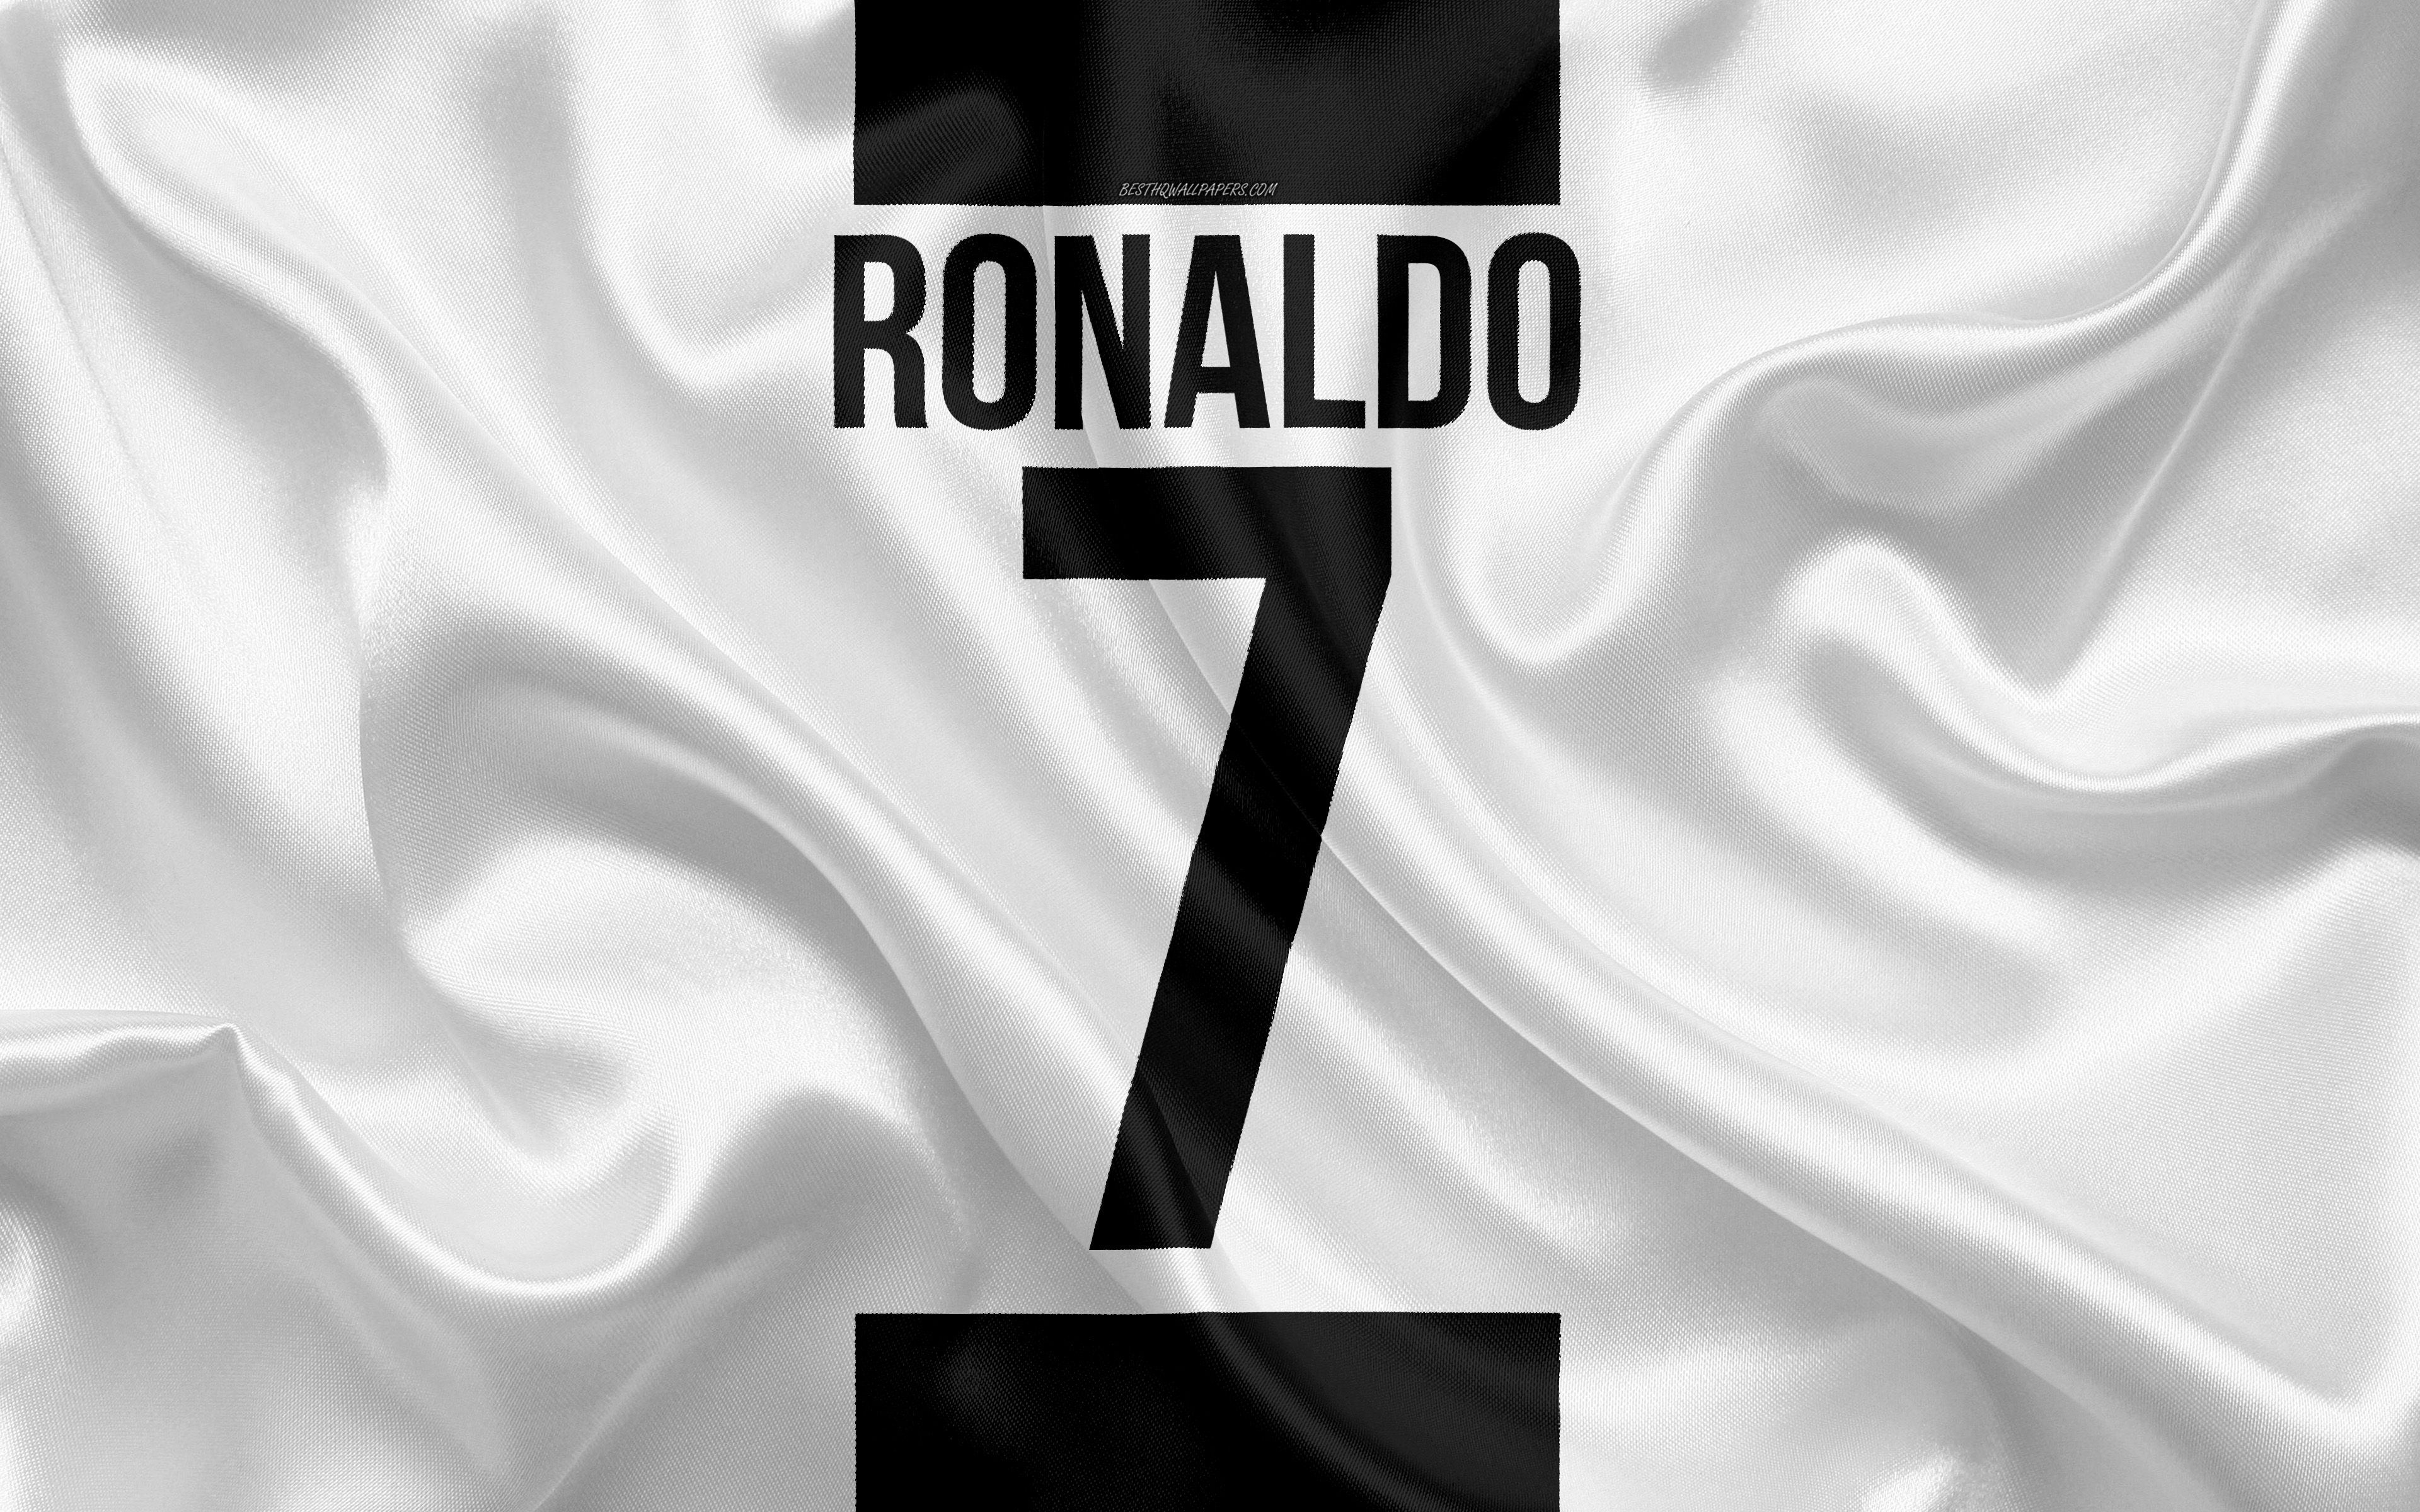 Download Wallpaper CR Juventus FC, Cristiano Ronaldo, T Shirt, 7th Number, Serie A, Juve, Turin, Italy, Football, Ronaldo, Silk Texture For Desktop With Resolution 3840x2400. High Quality HD Picture Wallpaper